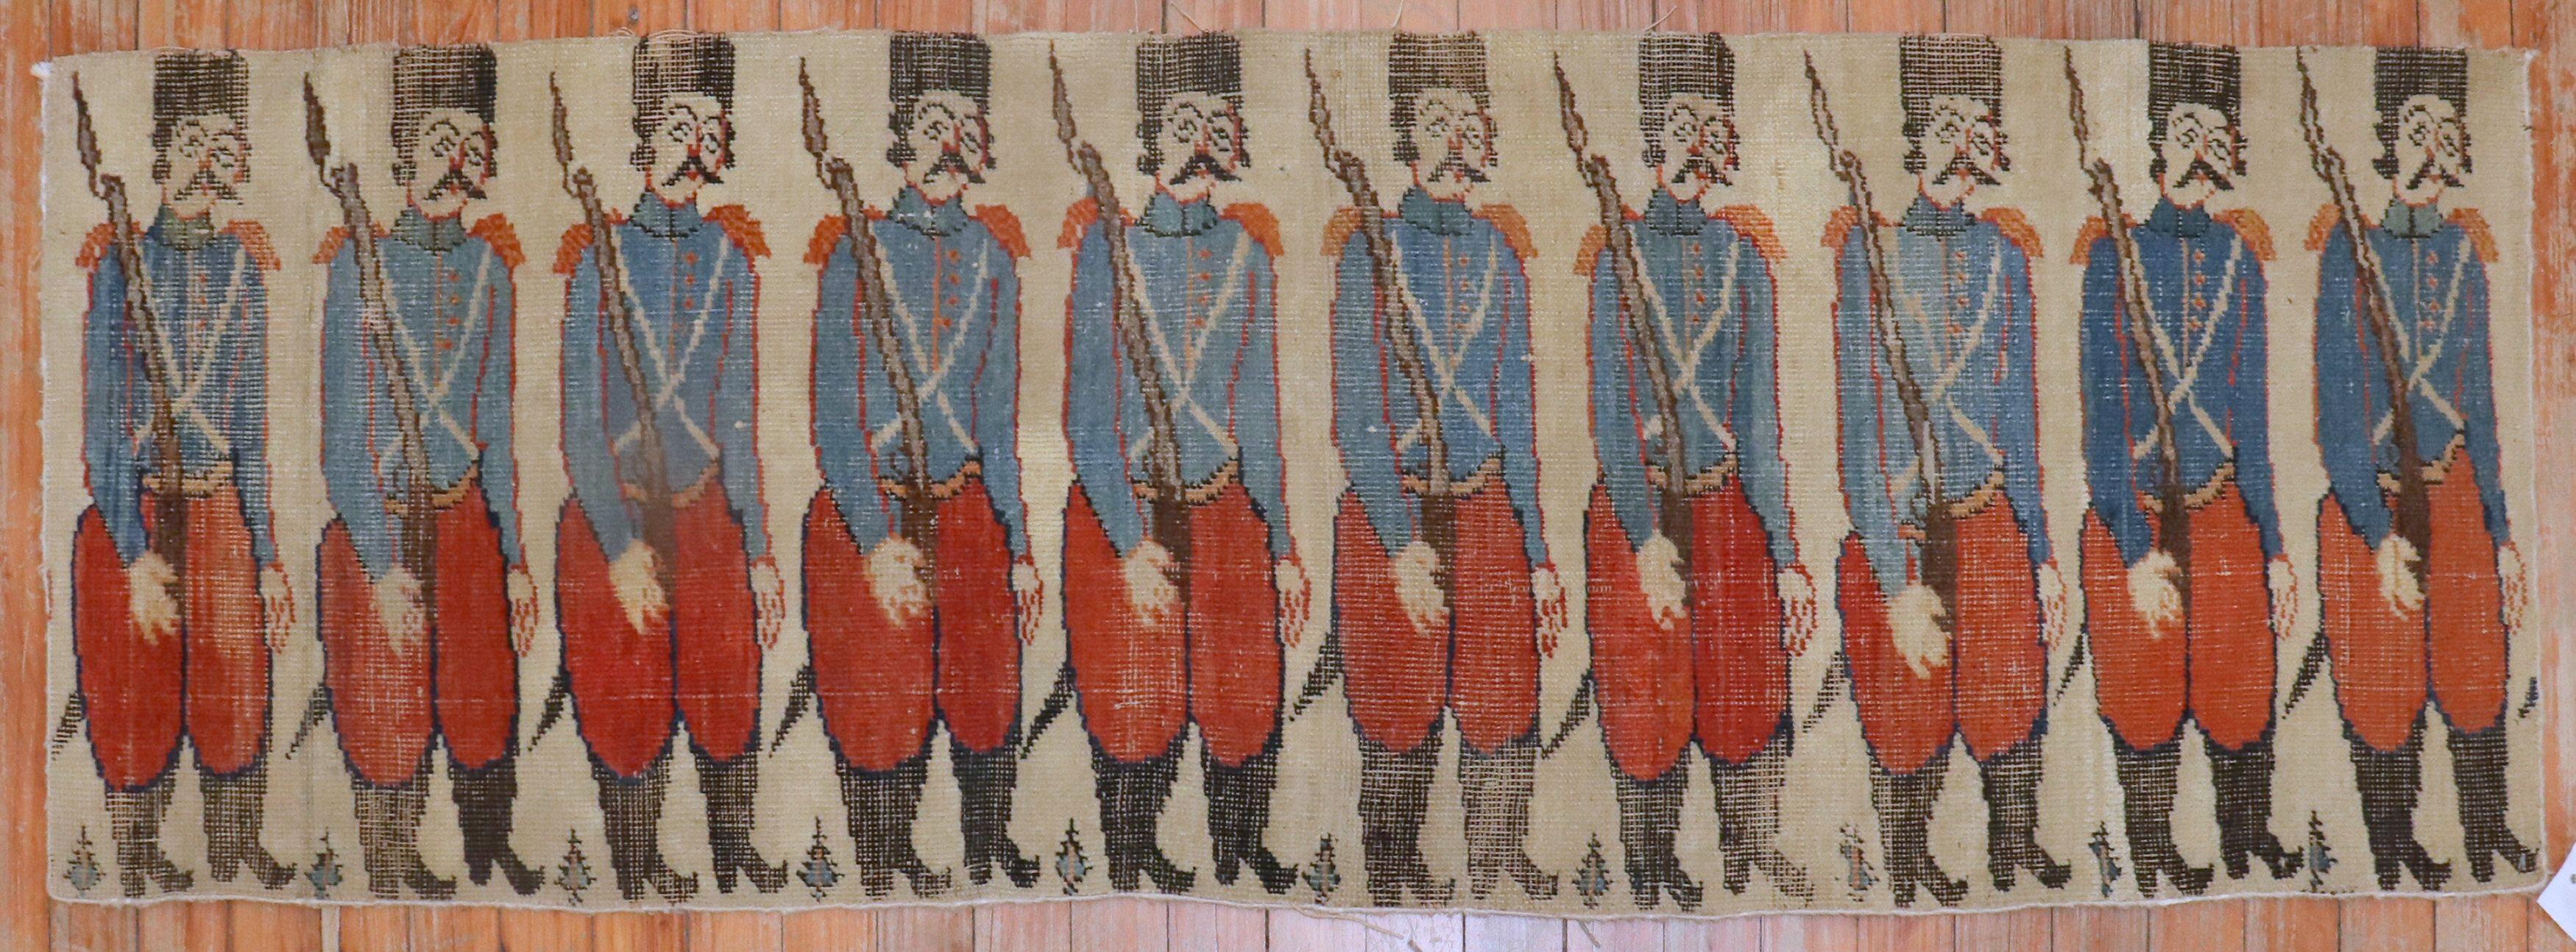 Mid 19th Century Persian Bakshaish Fragment Rug with 10 soldiers standing on a beige field.

Measures: 19''x 60''.